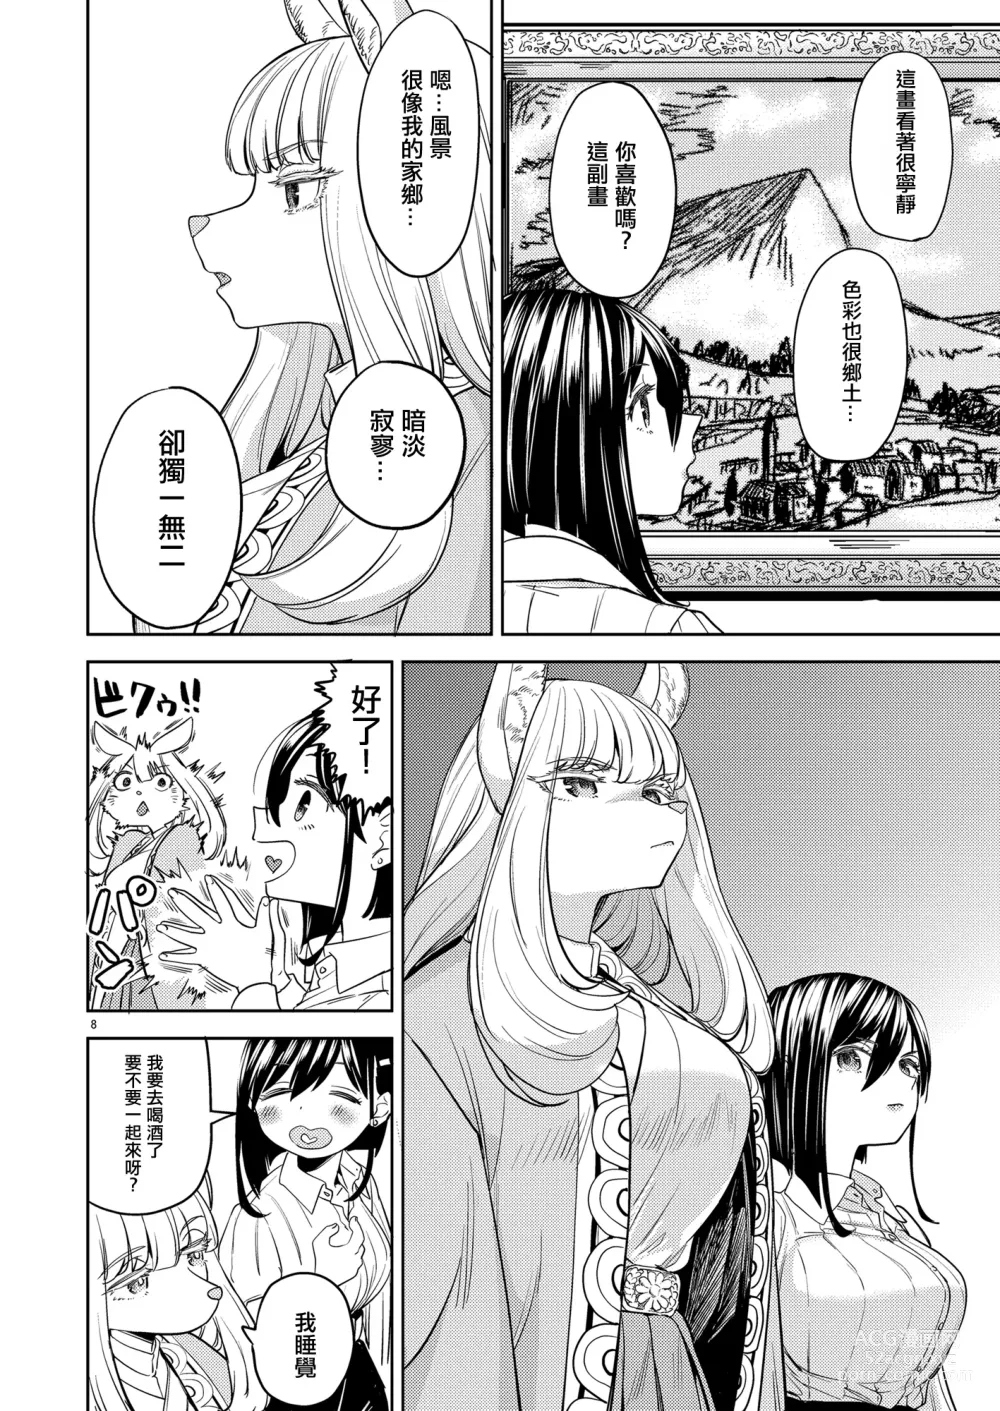 Page 12 of doujinshi 來一場蜜月旅行